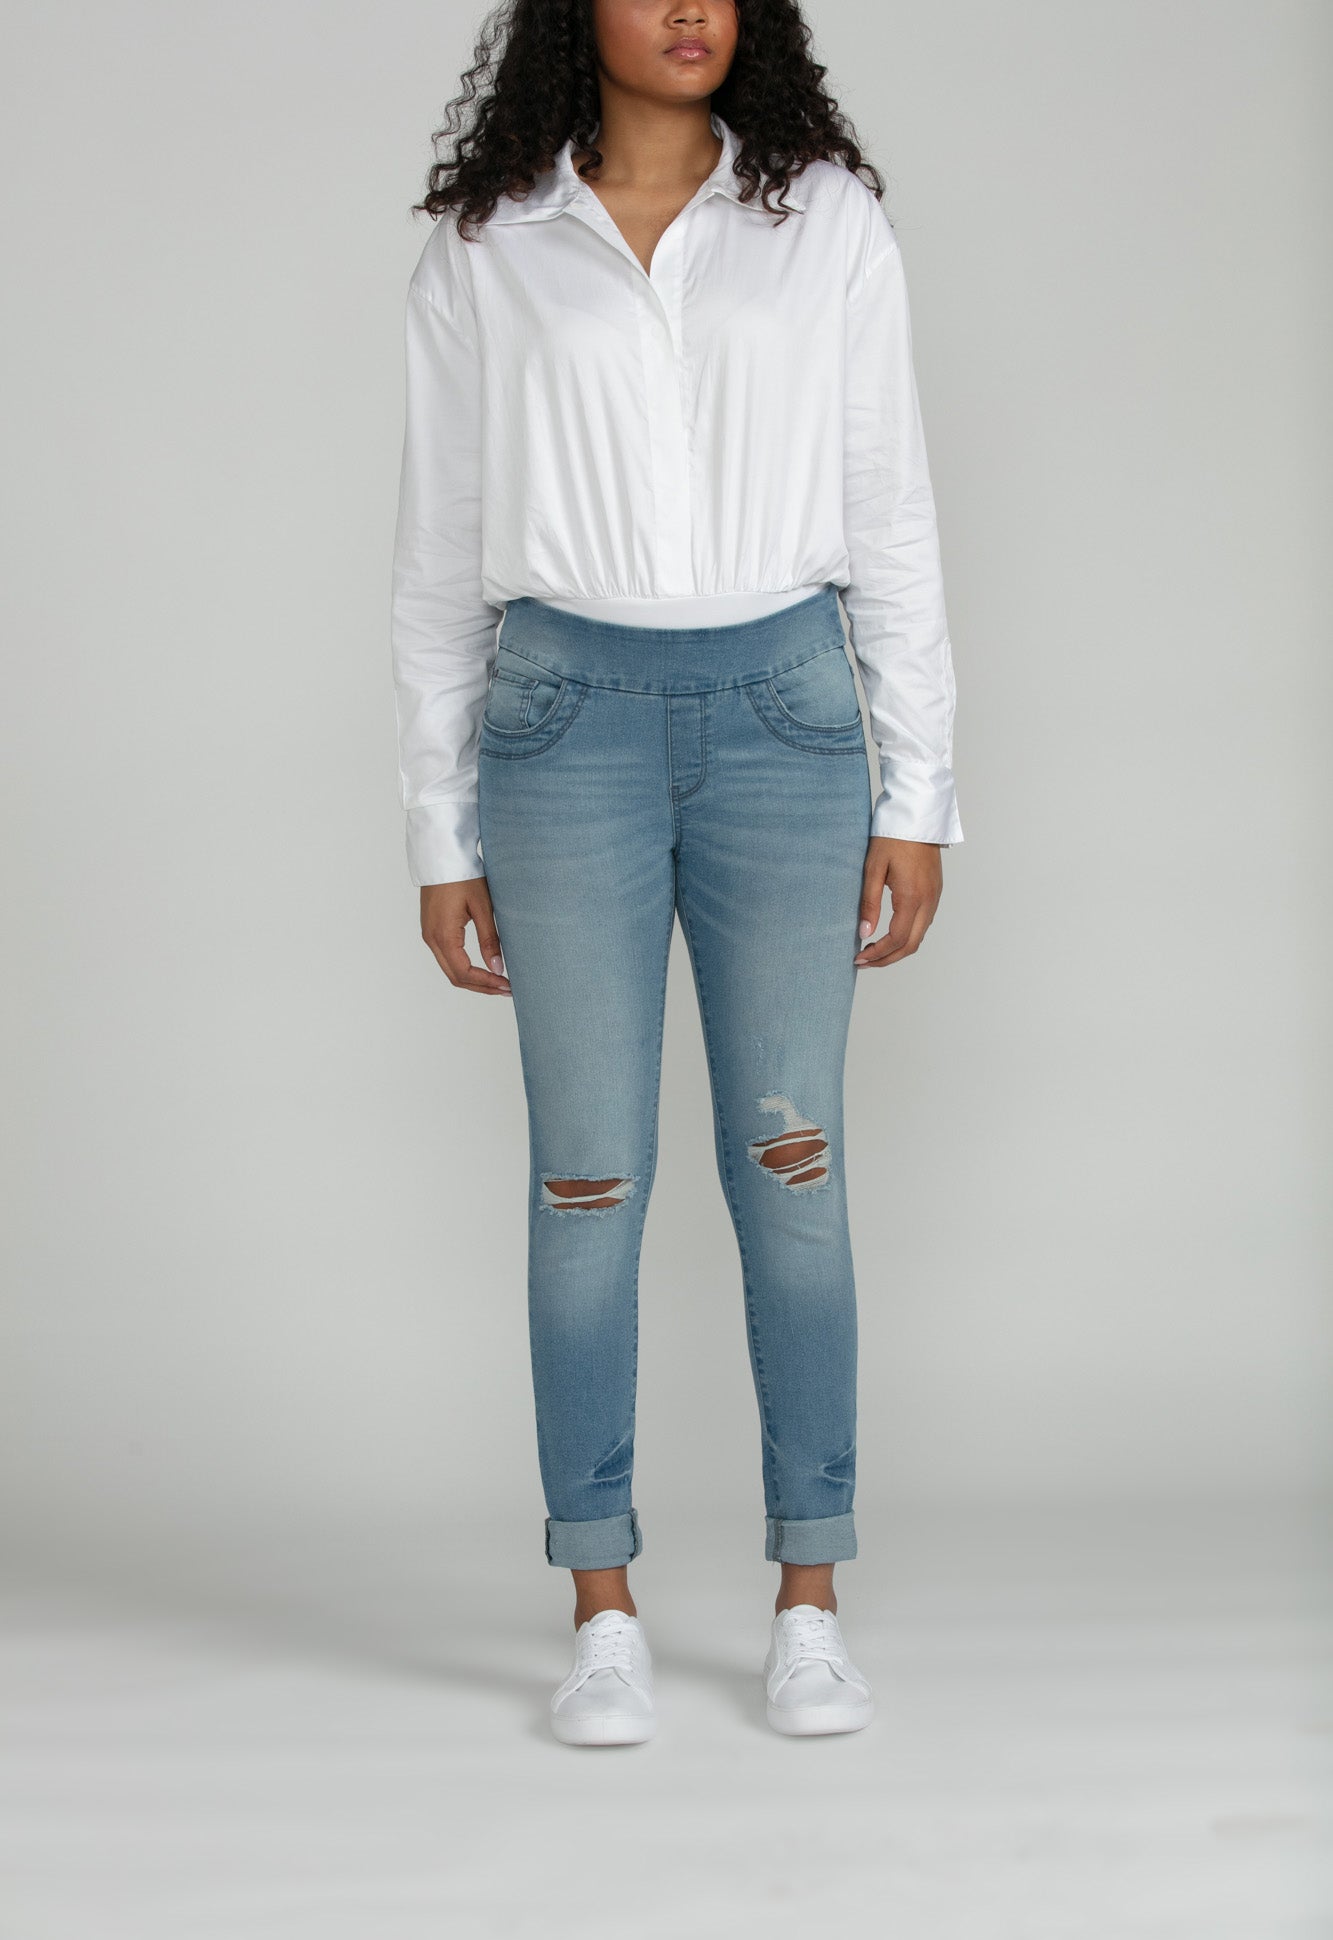 Bluberry denim Pull-On Ankle length Riley